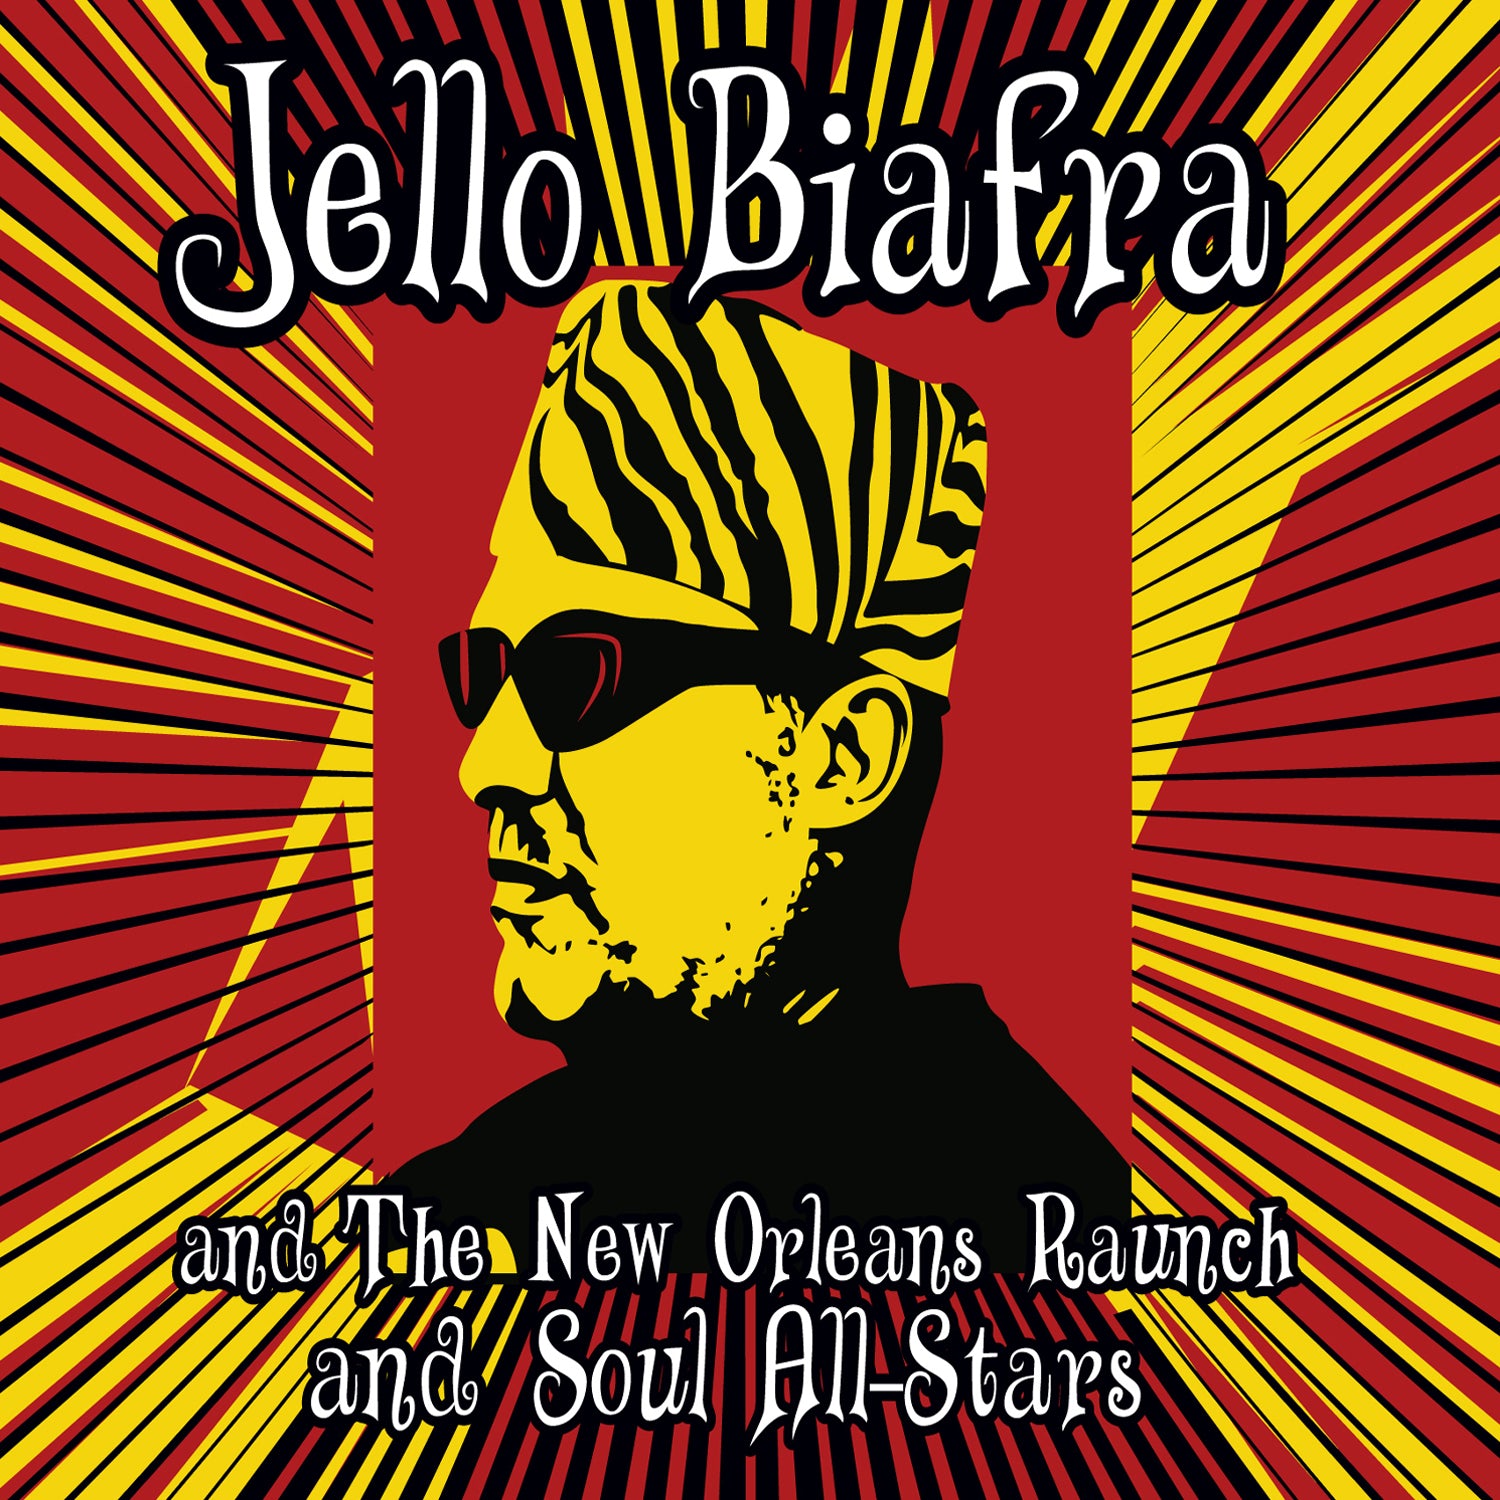 v400 - Jello Biafra And The New Orleans Raunch And Soul All-Stars - "Walk On Jindal's Splinters"